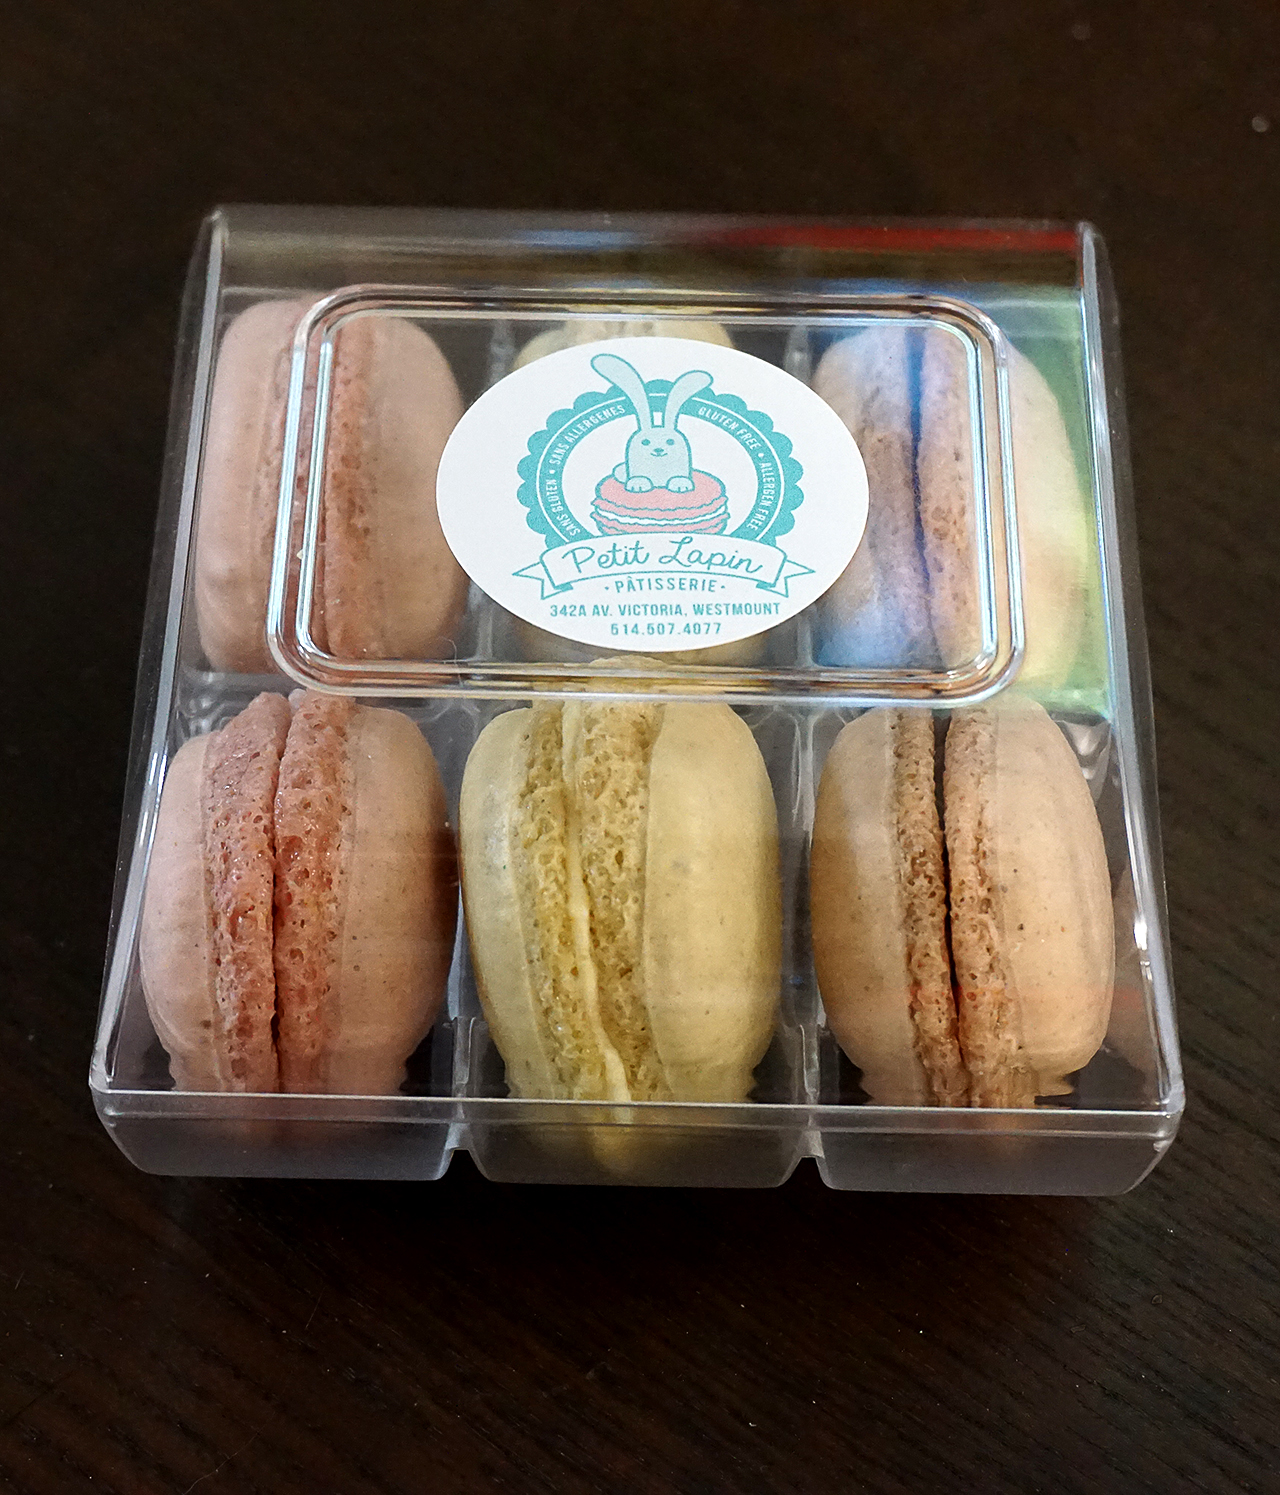 Gluten free macarons from Petit Lapin Bakery - gluten free bakery in Montreal, Quebec, Canada